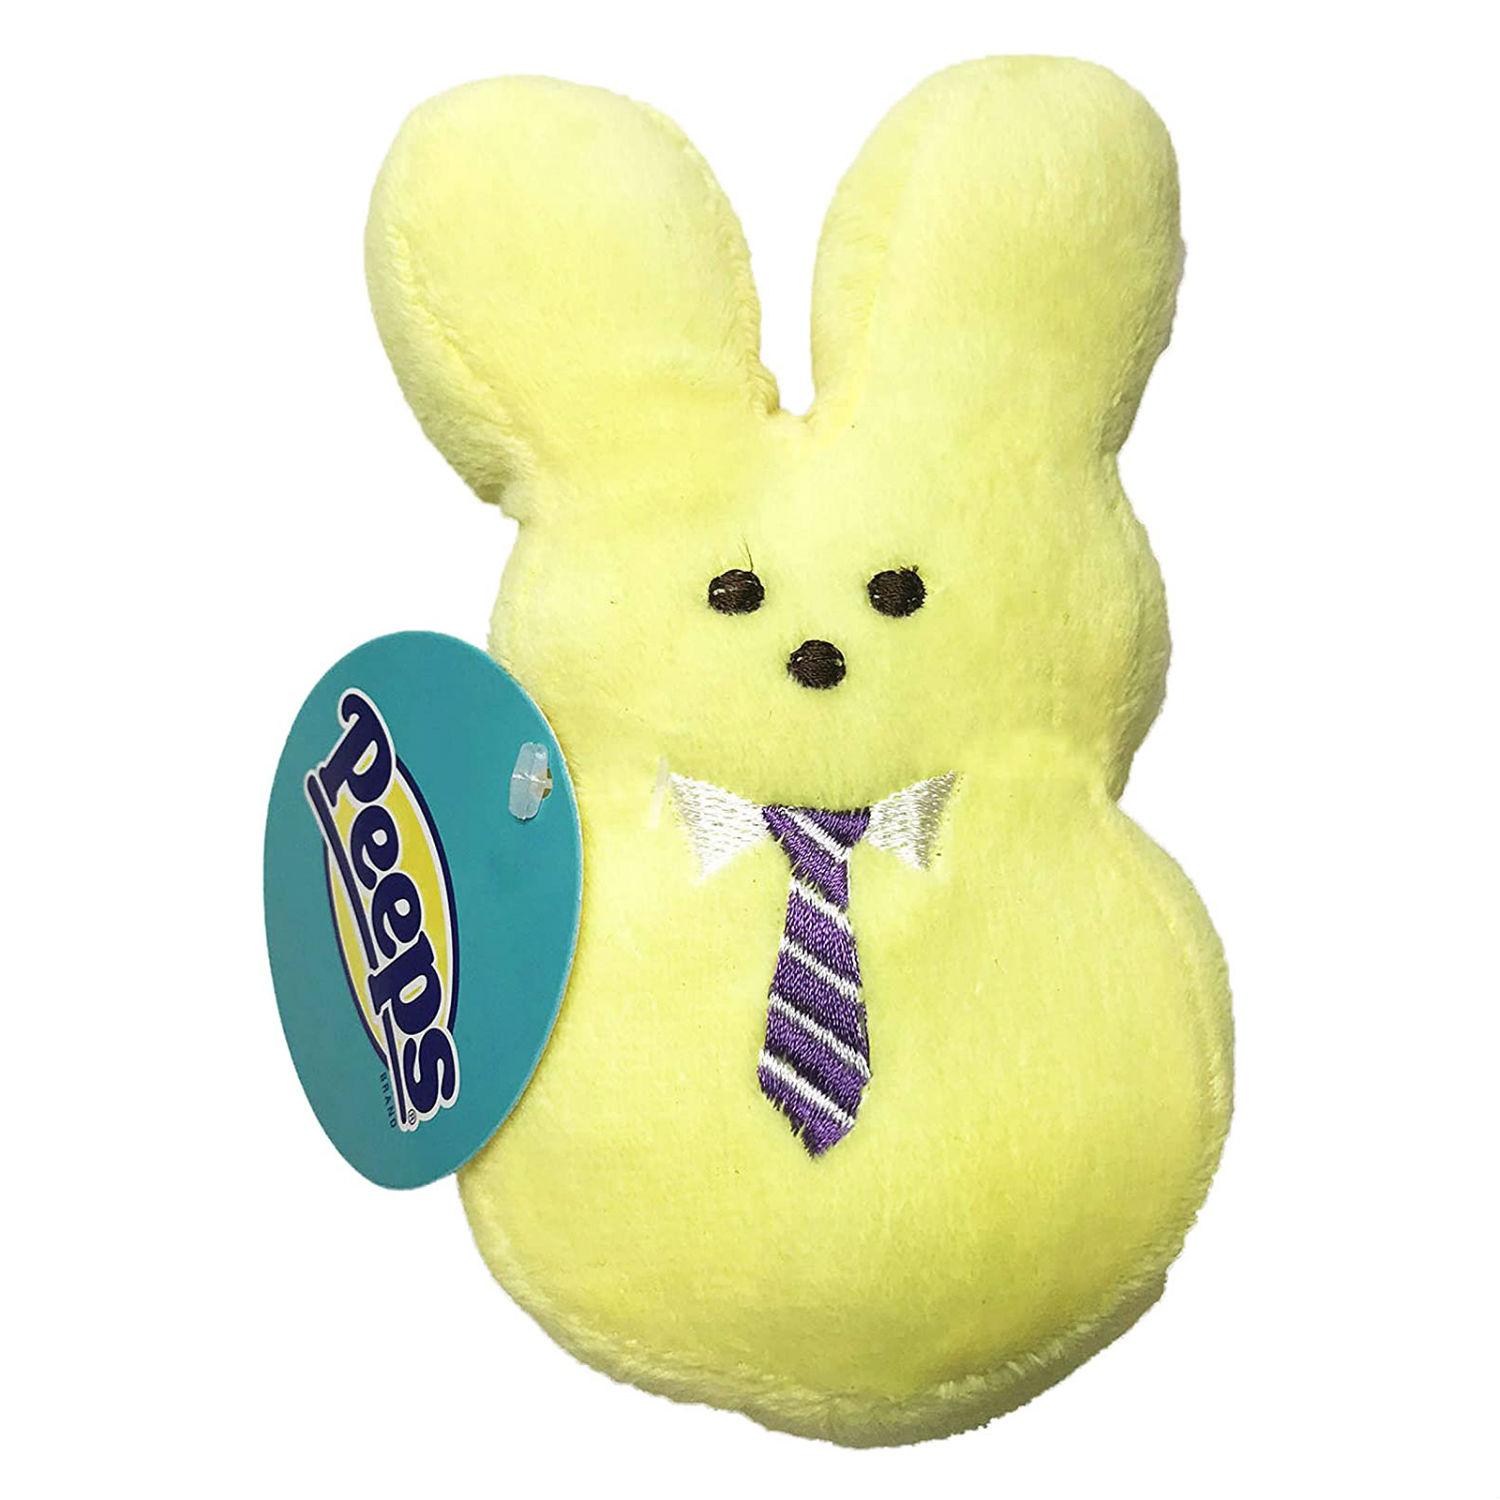 How to Make a Bunny Peeps Plush Toy 